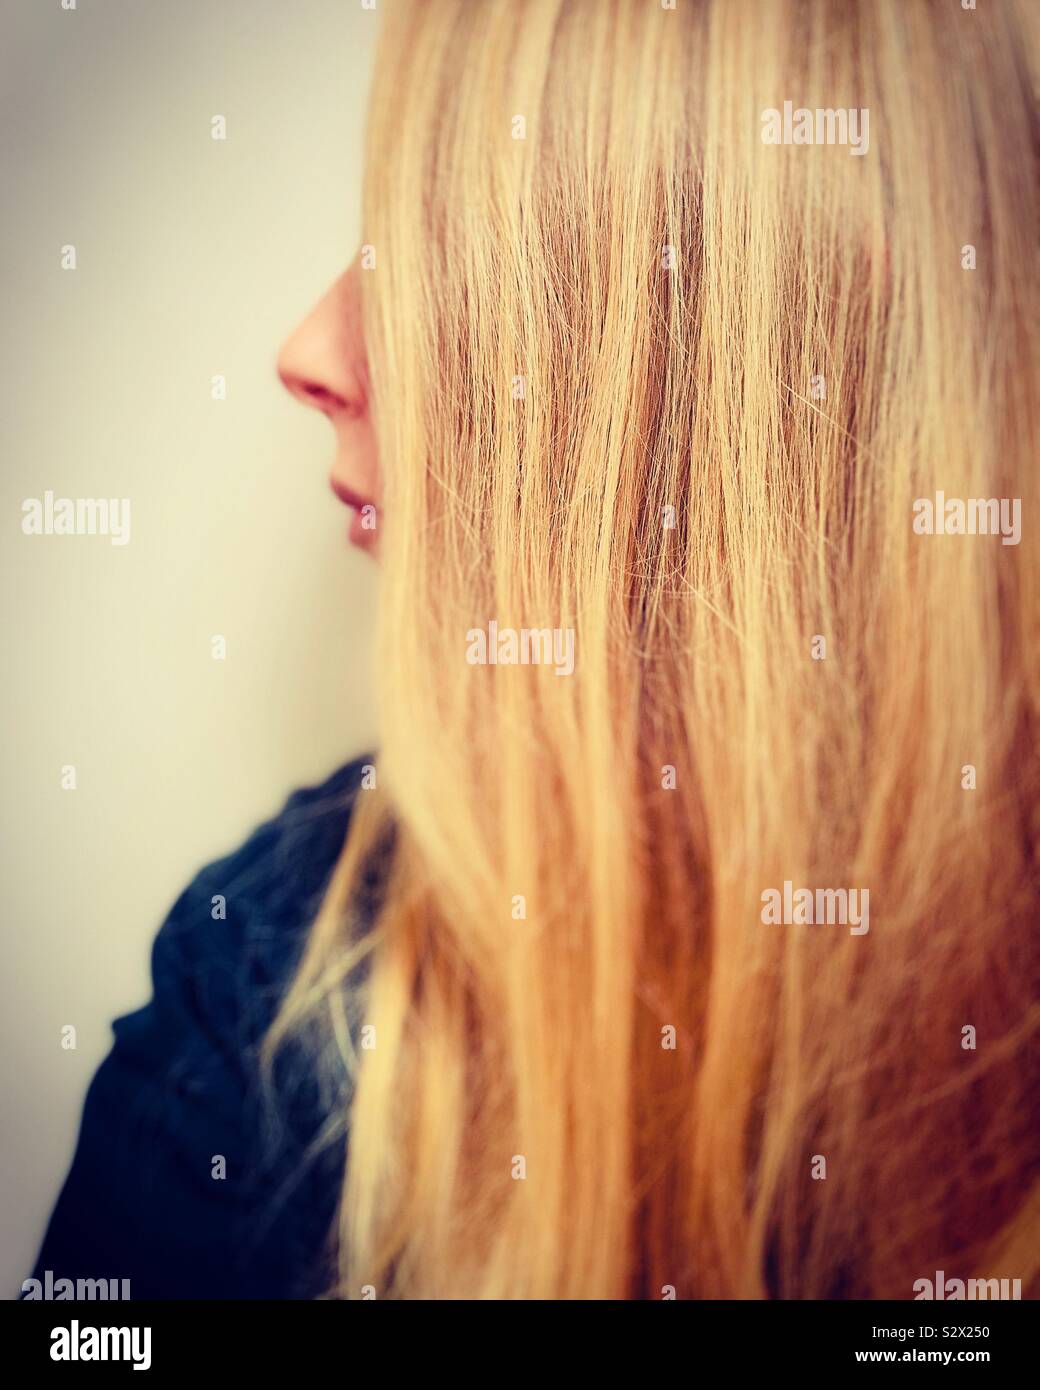 Profile of woman with long blonde hair Stock Photo